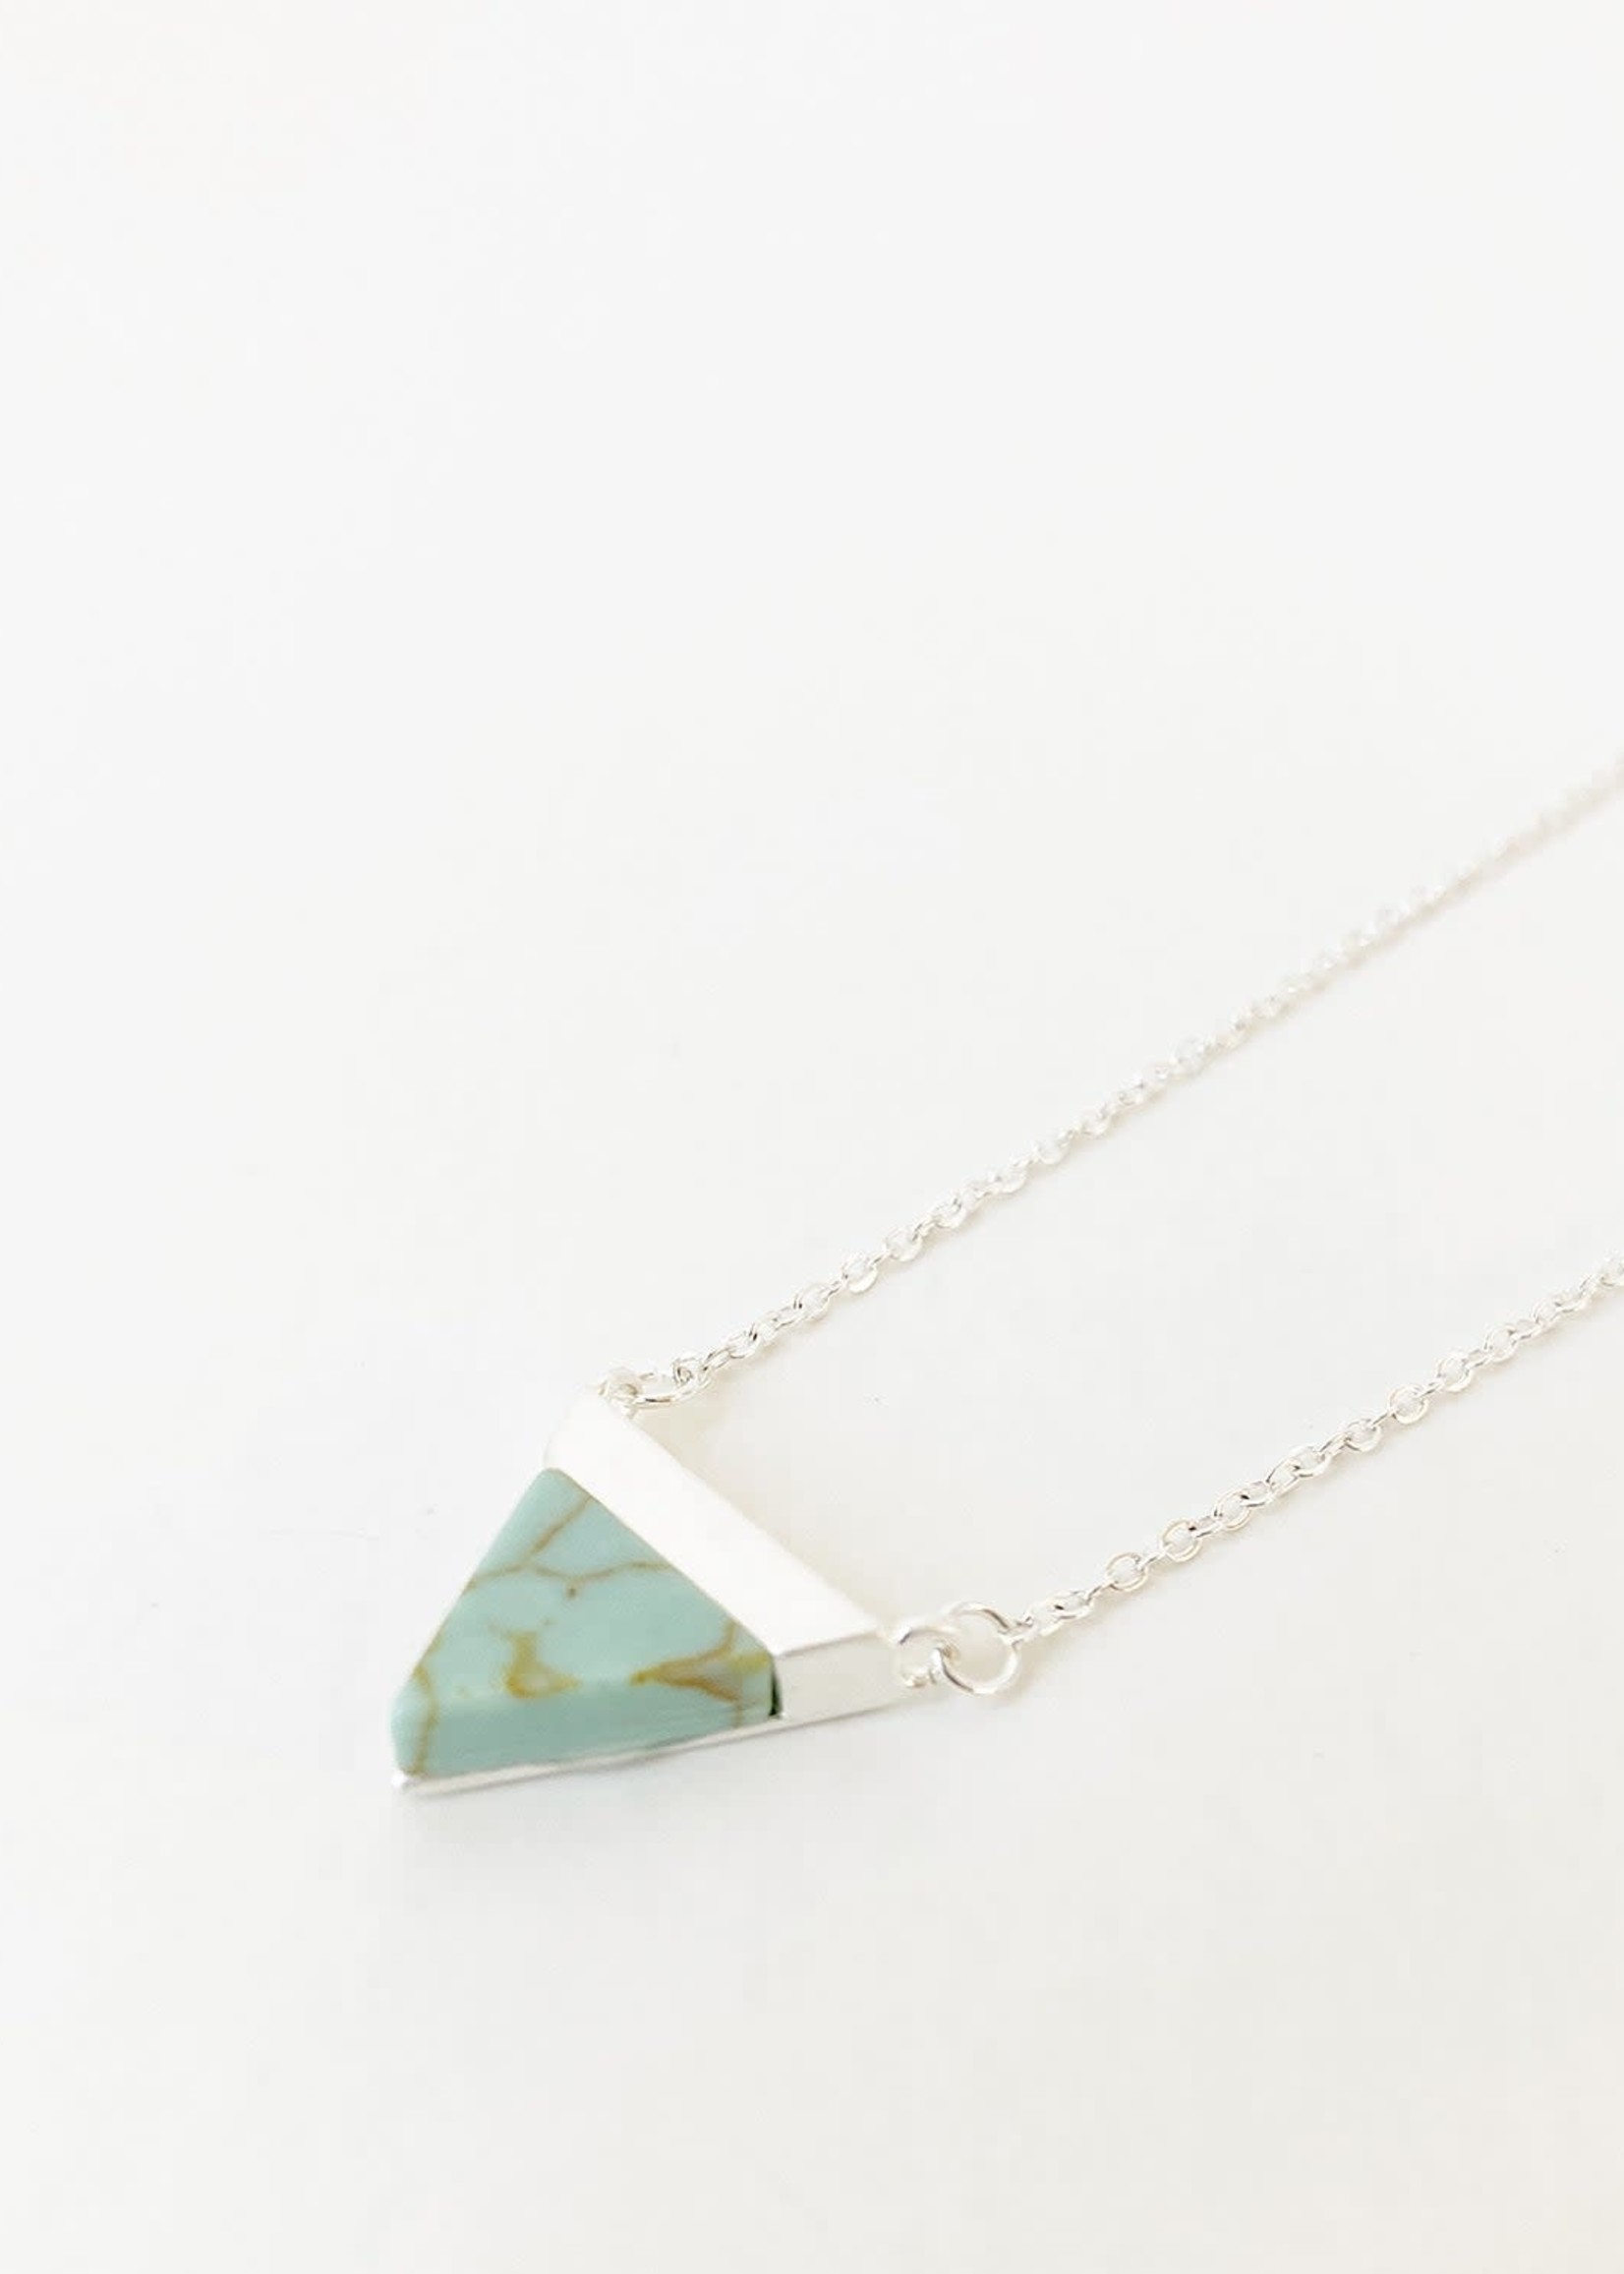 Caracol Caracol Turquoise & Silver Delicate Necklace w/Real Stone Triangle Pendant 1489-TRQ-S